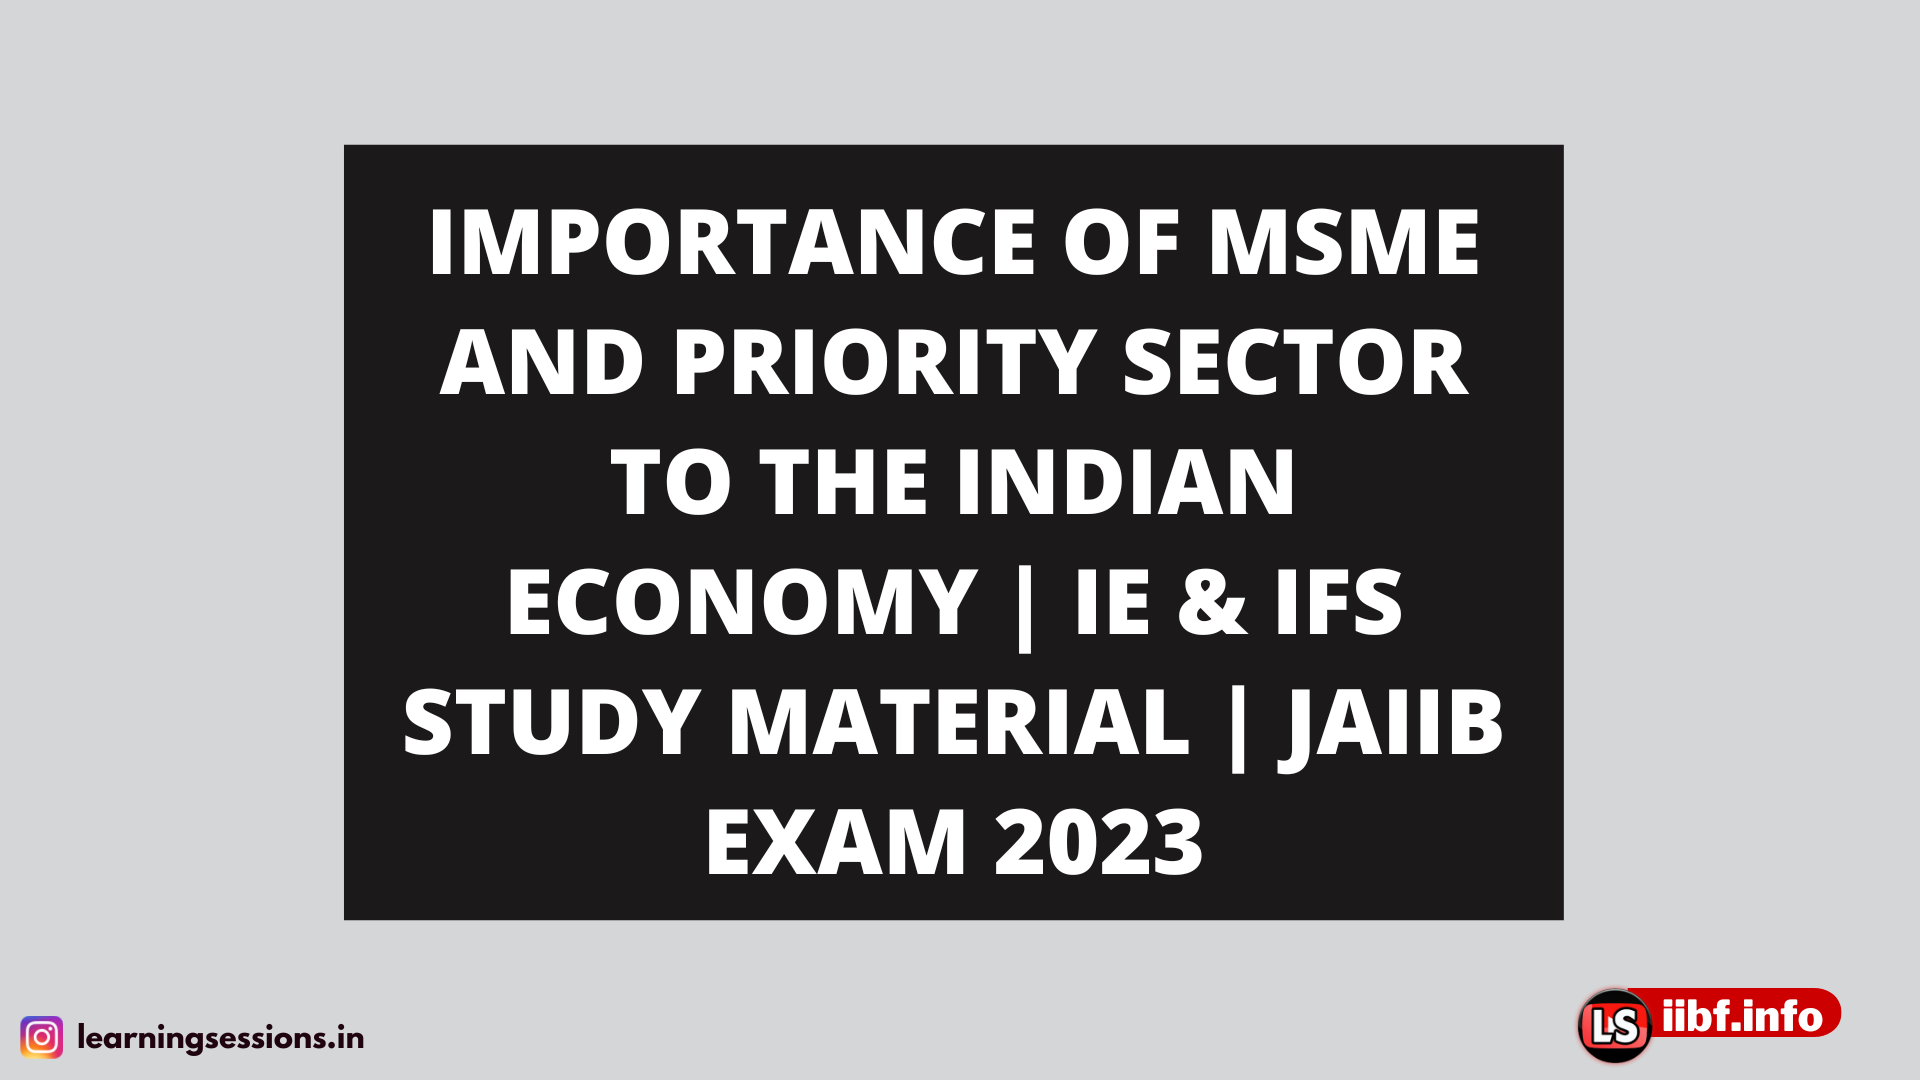 IMPORTANCE OF MSME AND PRIORITY SECTOR TO THE INDIAN ECONOMY | IE & IFS STUDY MATERIAL | JAIIB EXAM 2023